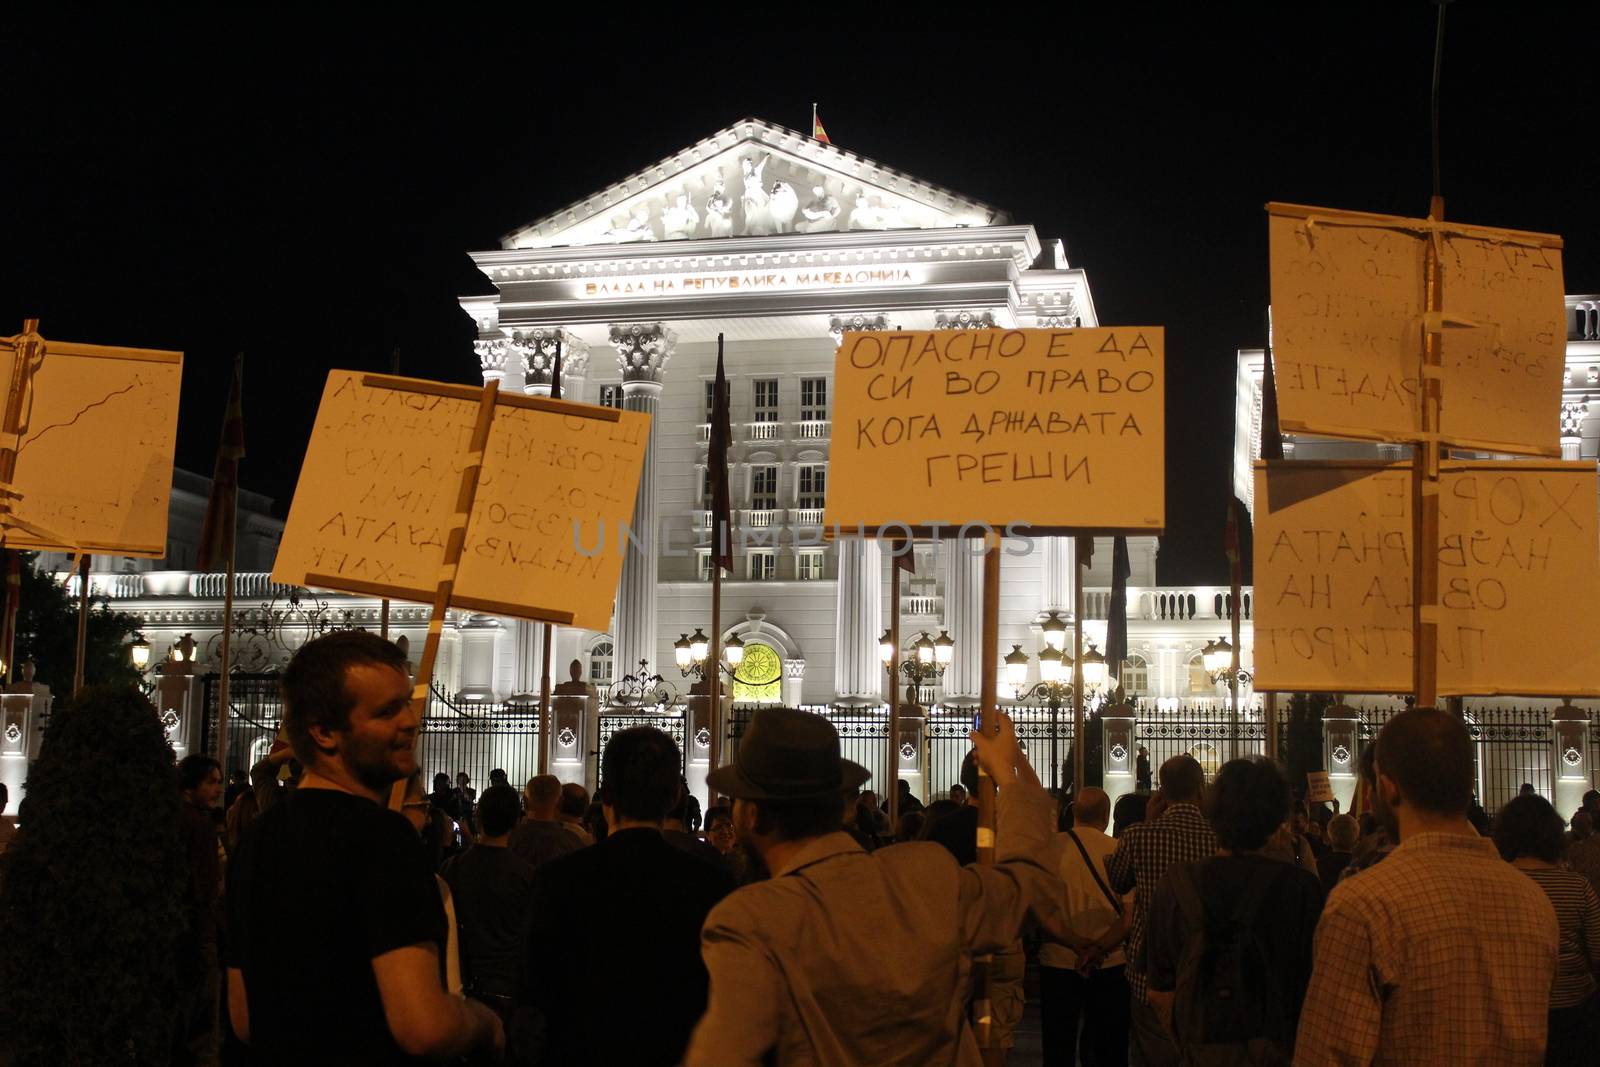 MACEDONIA, Skopje: Protesters raise signs outside a government building as thousands continue anti-government protests in Skopje, Macedonia on April 19, 2016. The protests began nearly one week ago, as demonstrators denounced President Gjorge Ivanov's decision to halt probes into more than 50 public figures involved in a wiretapping scandal. Meanwhile, snap elections have been called for June 5.